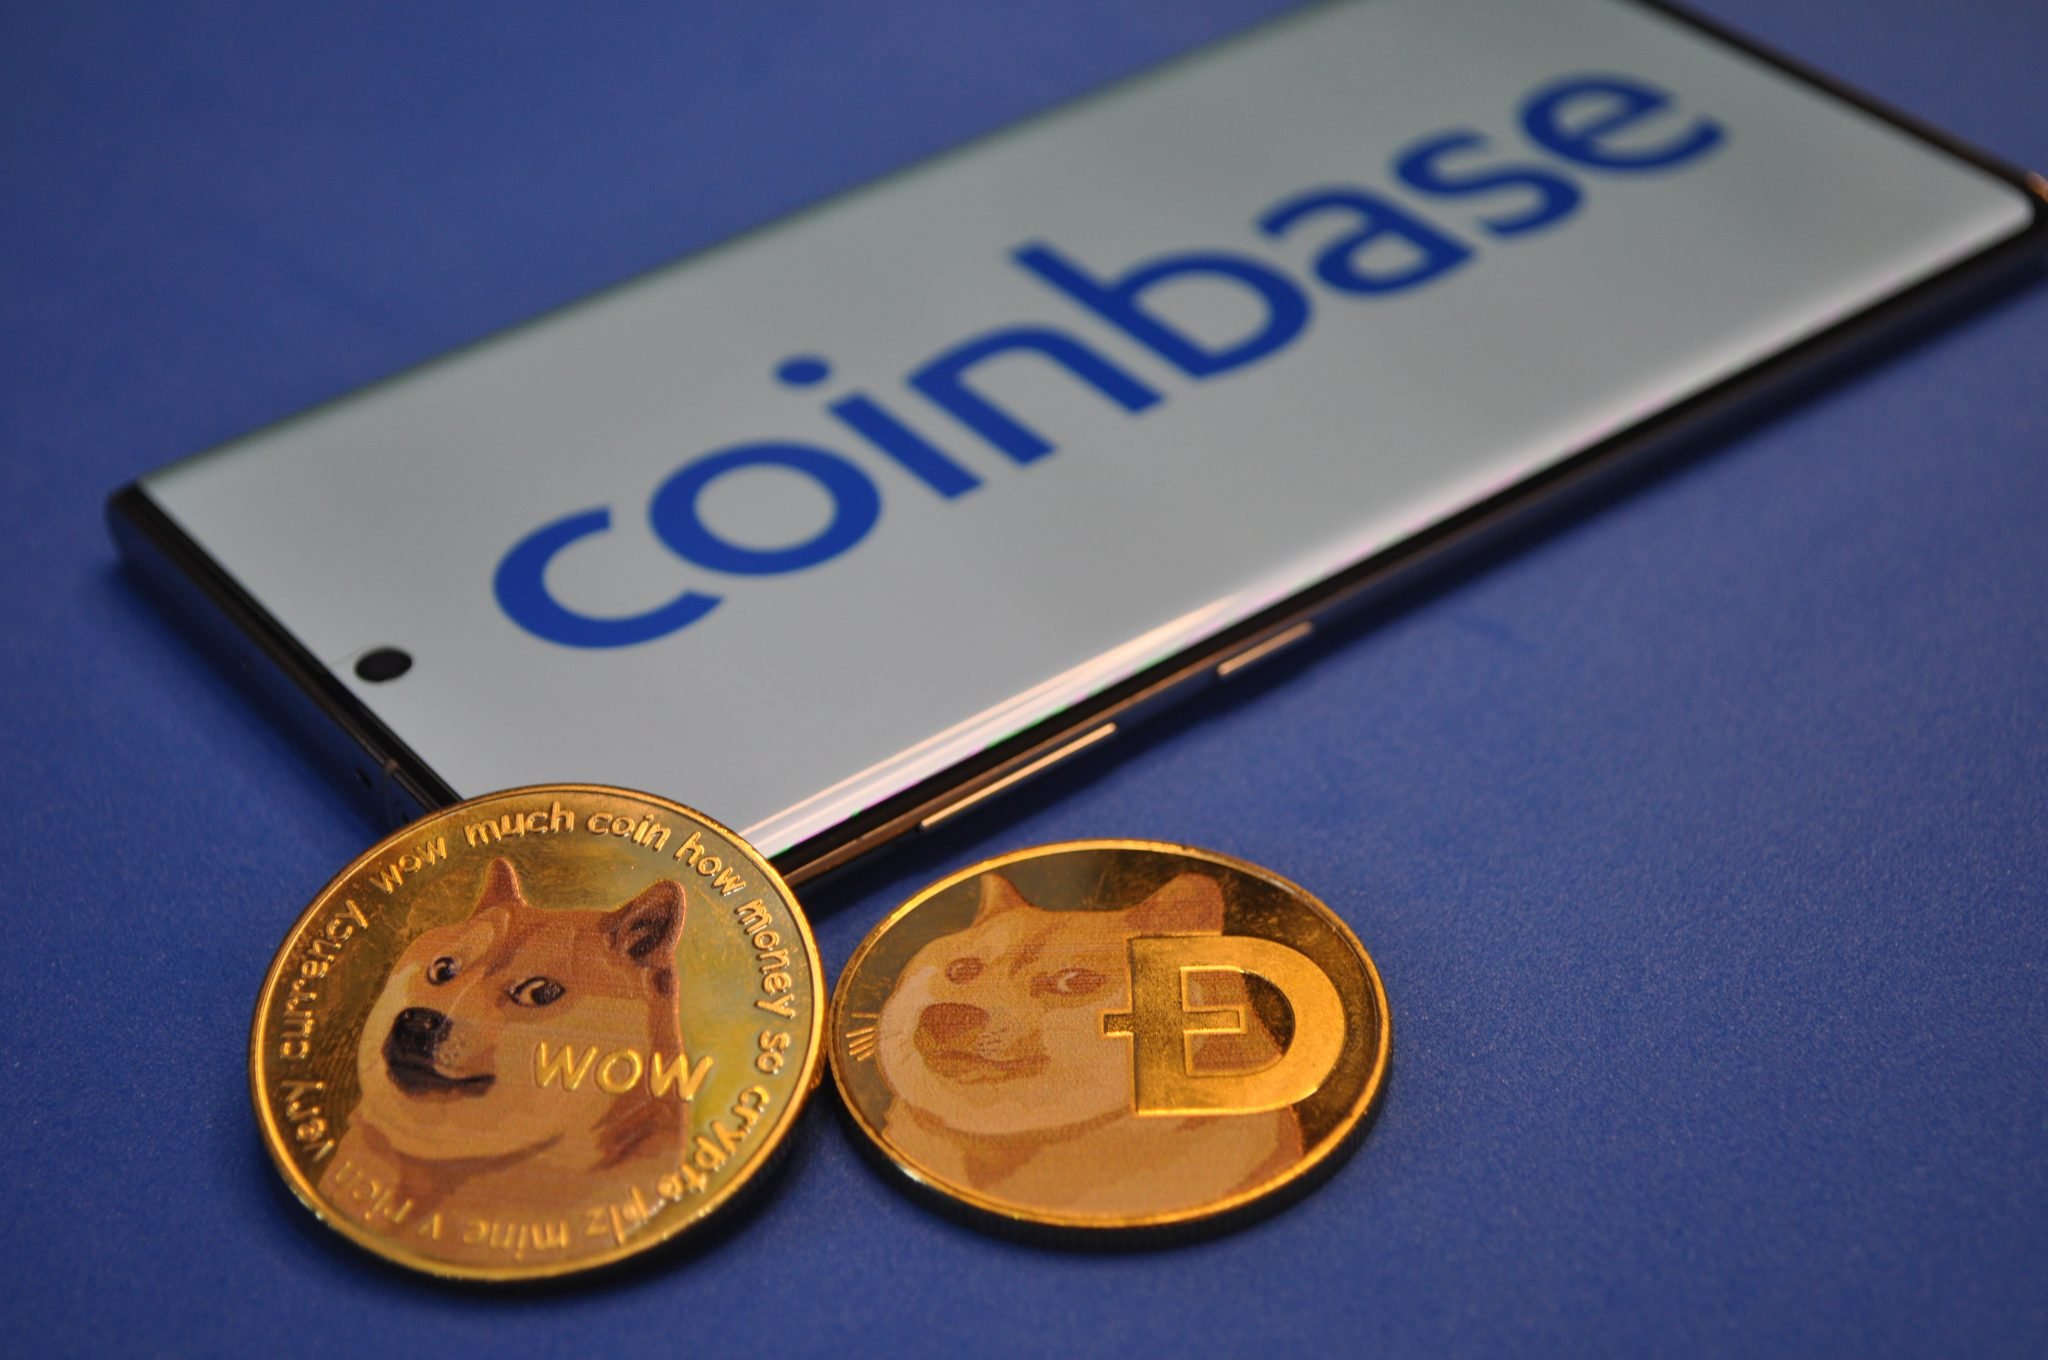 Kuching, Sarawak Malaysia - June 2, 2021: Macro view of gold color shiny coins with Dogecoin symbol and Coinbase background